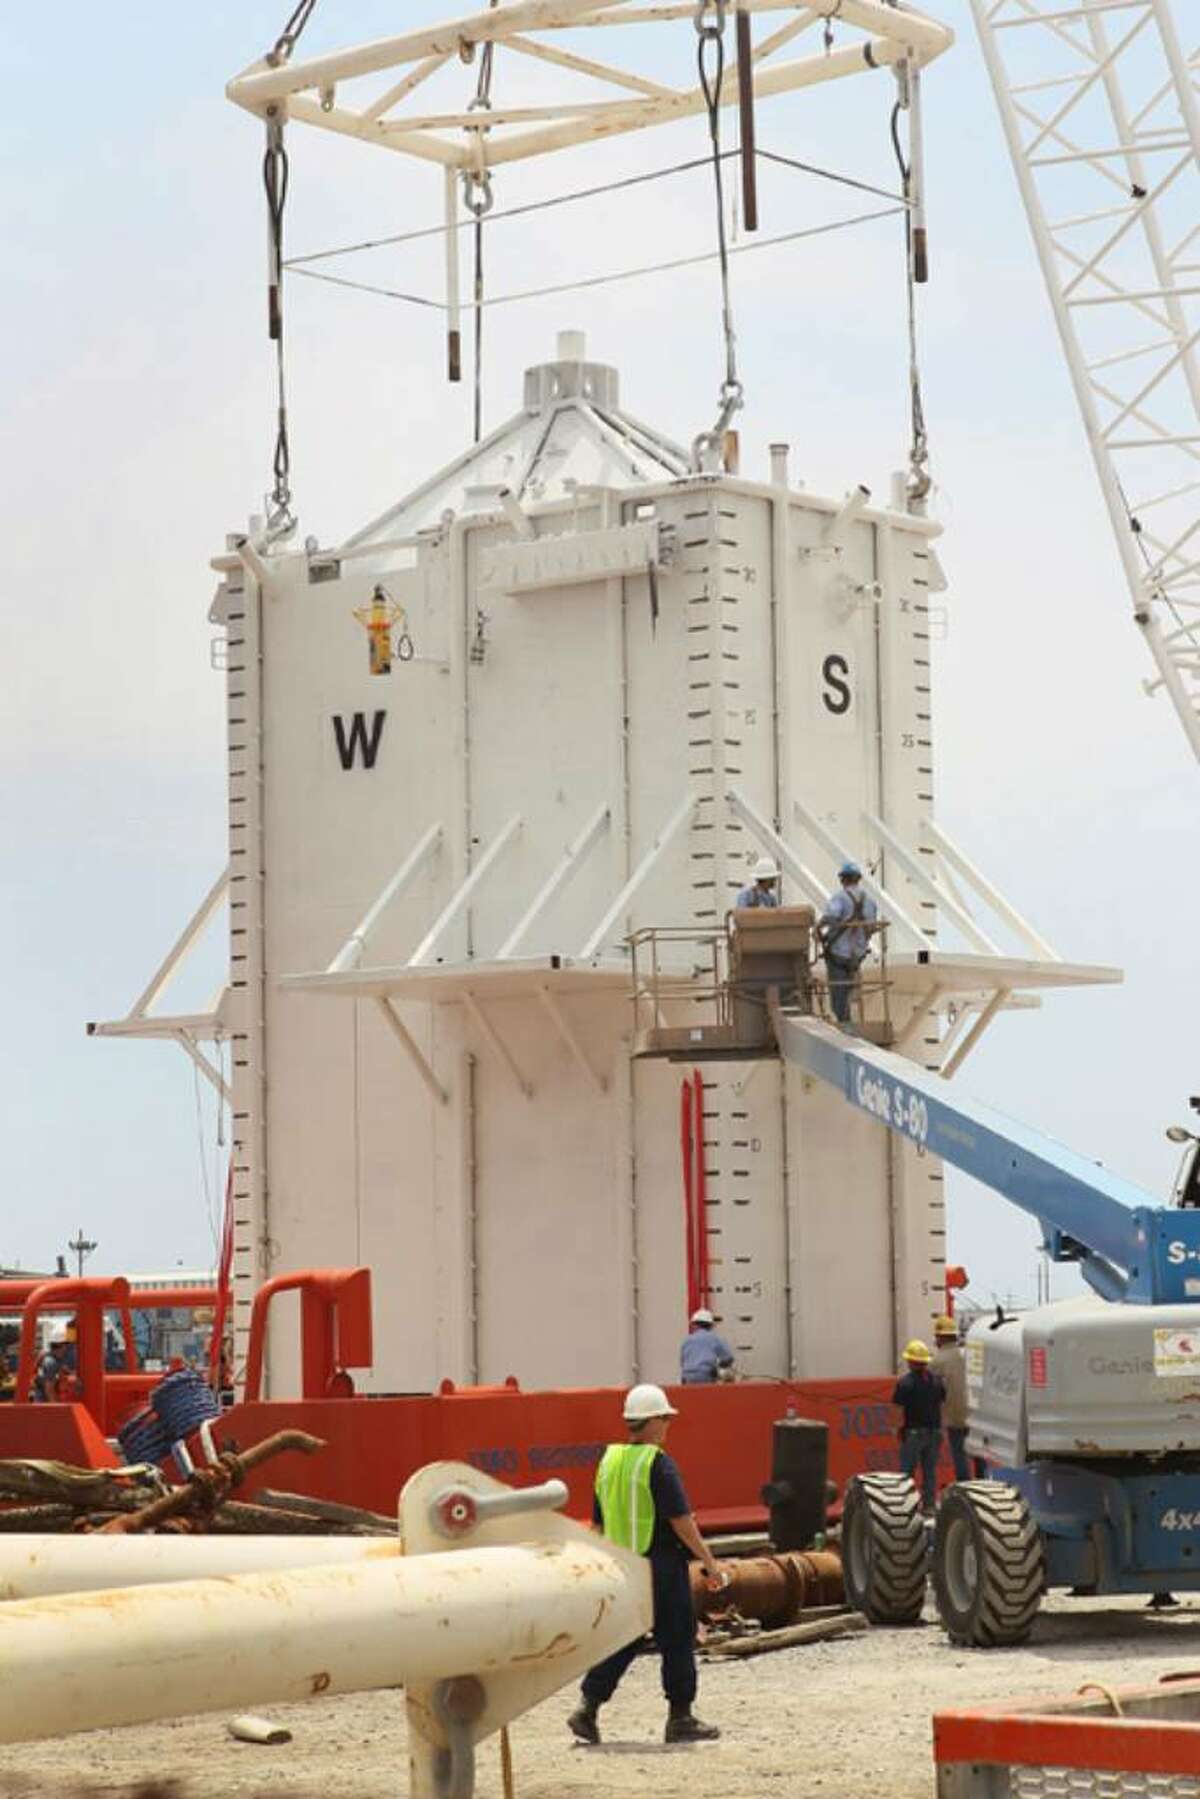 PORT FOURCHON, LA - MAY 05: A four-story 100-ton "pollution control chamber" which will be lowered 5,000 feet below the surface of the water to capture oil gushing from the collapsed oil well off the coast of Louisiana is loaded on the back of a ship May 5, 2010 in Port Fourchon, Louisiana. The chamber, commissioned by BP, is planned to be lowered onto the leaking pipe by end of the week to try to suck in the flowing oil to tanker ship on the surface. The Deepwater Horizon offshore oil well began leaking after the rig caught fire and collapsed last month. (Photo by Scott Olson/Getty Images)